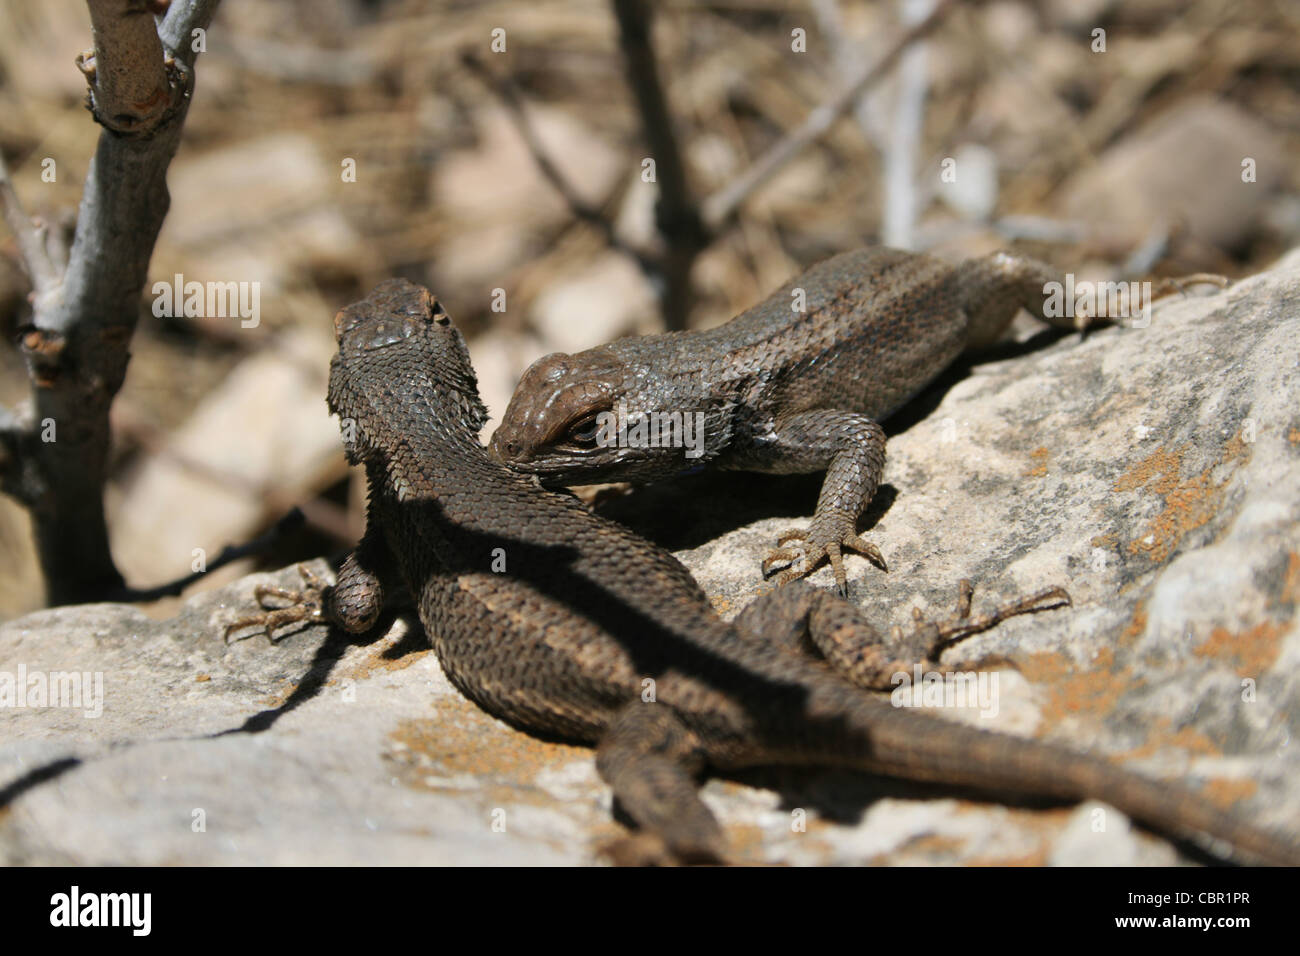 western fence lizards (Sceloporus occidentalis) fighting with one biting the other Stock Photo